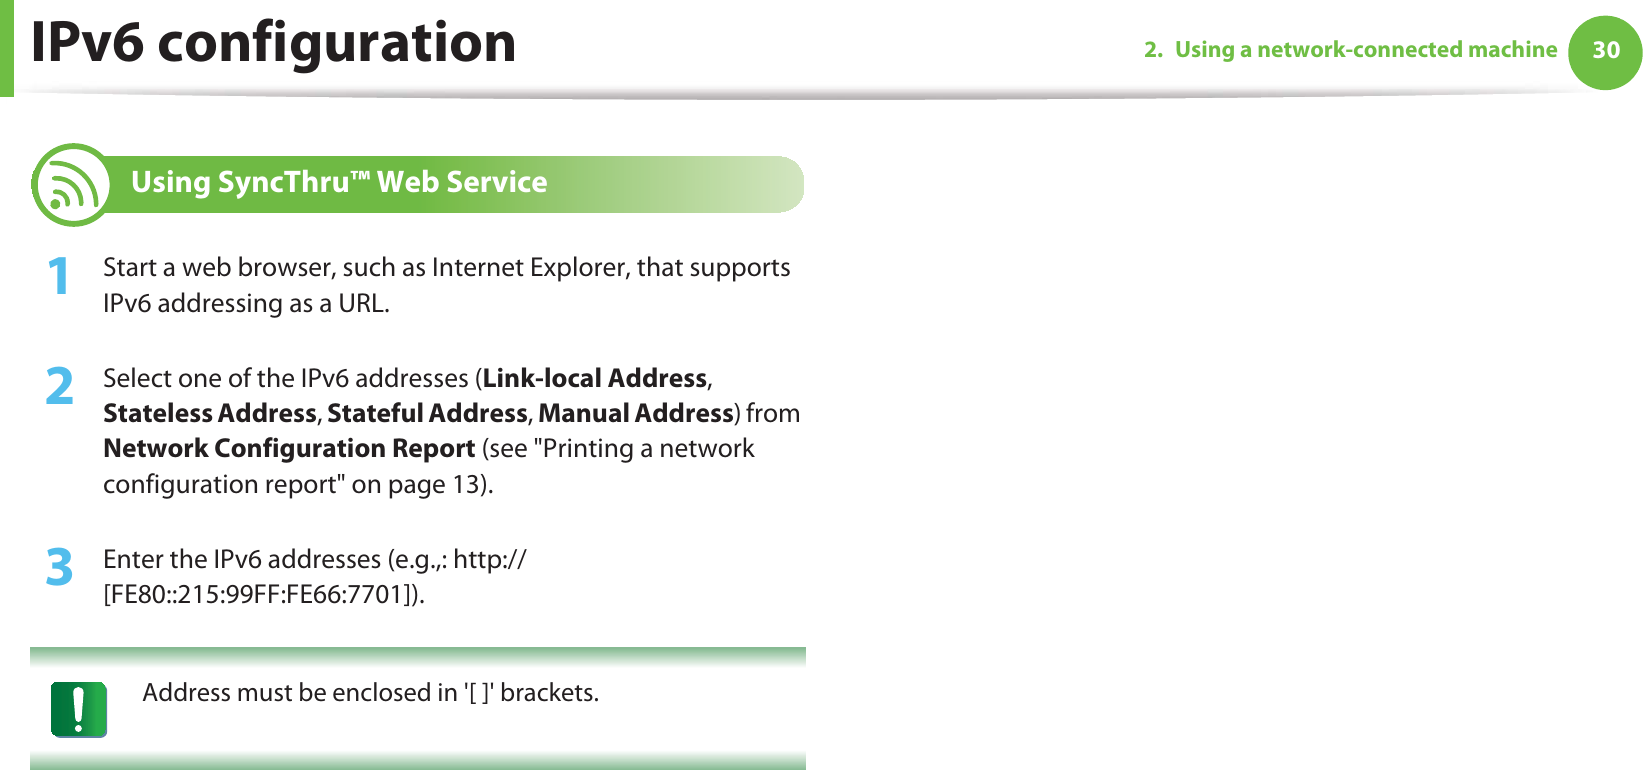 IPv6 configuration 302. Using a network-connected machine12 Using SyncThru™ Web Service1Start a web browser, such as Internet Explorer, that supports IPv6 addressing as a URL.2  Select one of the IPv6 addresses (Link-local Address, Stateless Address, Stateful Address, Manual Address) from Network Configuration Report (see &quot;Printing a network configuration report&quot; on page 13).3  Enter the IPv6 addresses (e.g.,: http://[FE80::215:99FF:FE66:7701]). Address must be enclosed in &apos;[ ]&apos; brackets. 